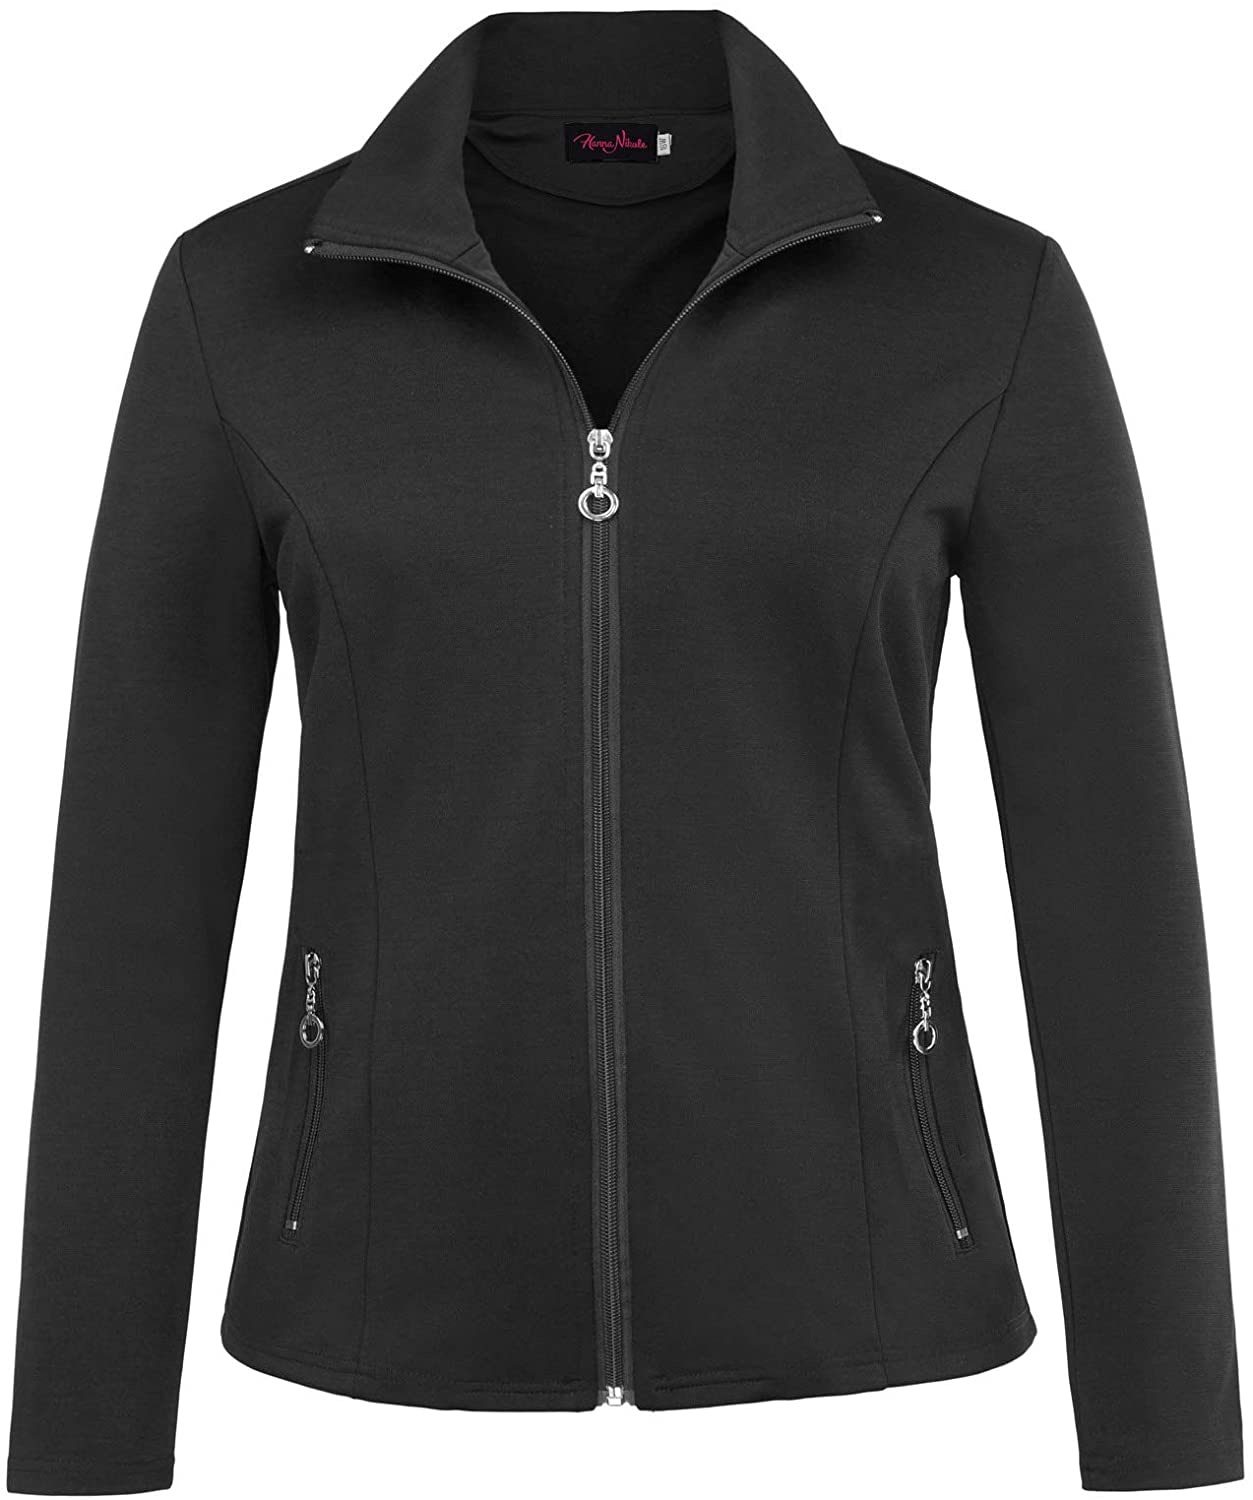 Hanna Nikole Plus Size Running Jackets for Women Full Zip with Thumb Holes 